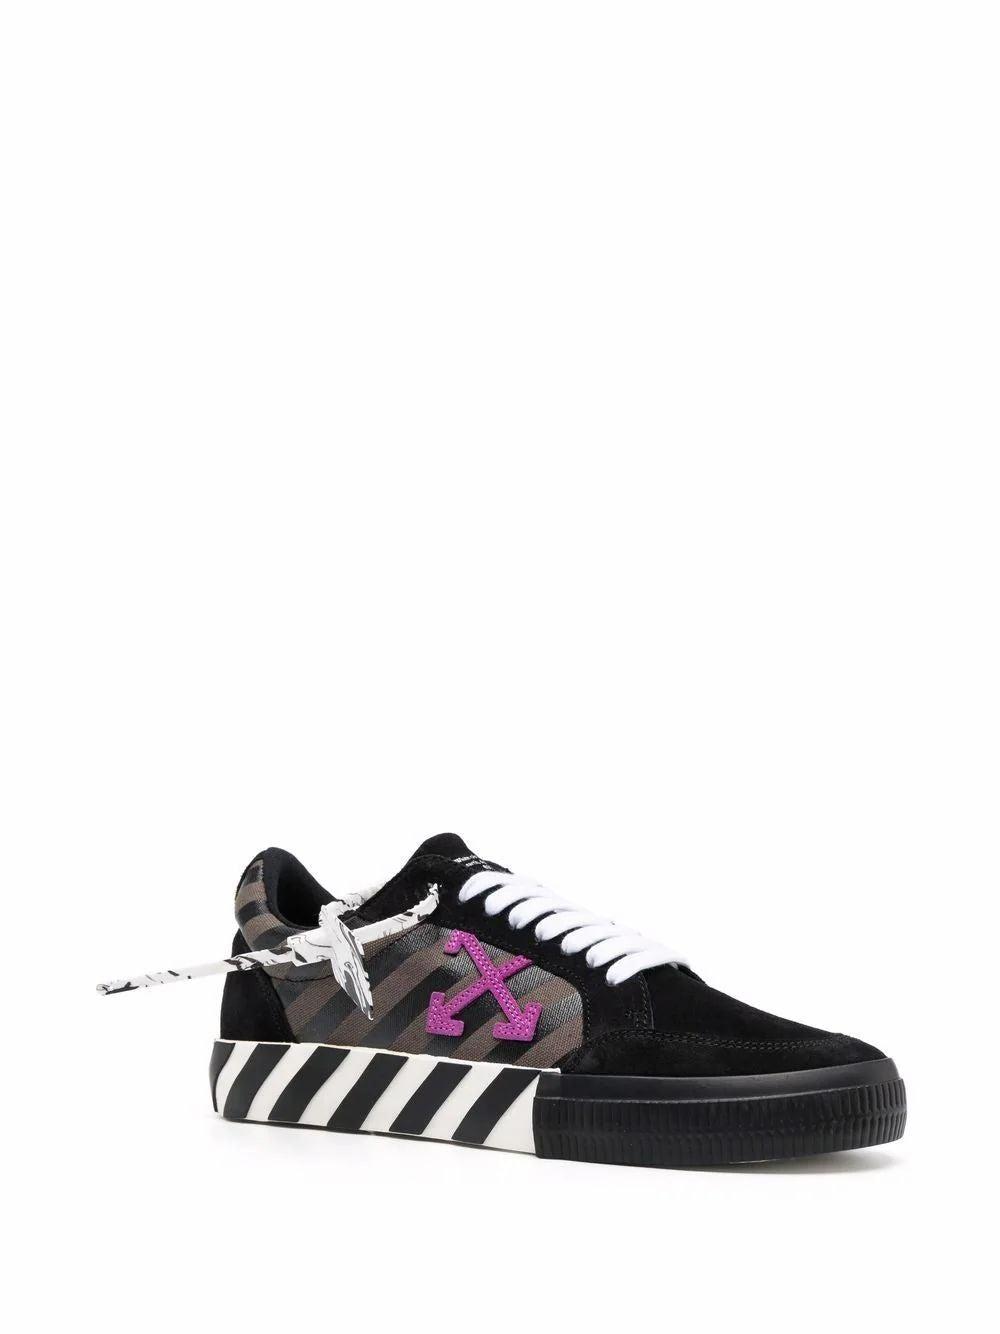 Off-White c/o Virgil Abloh Leather White Sneakers Black for Men Save 50% - Lyst